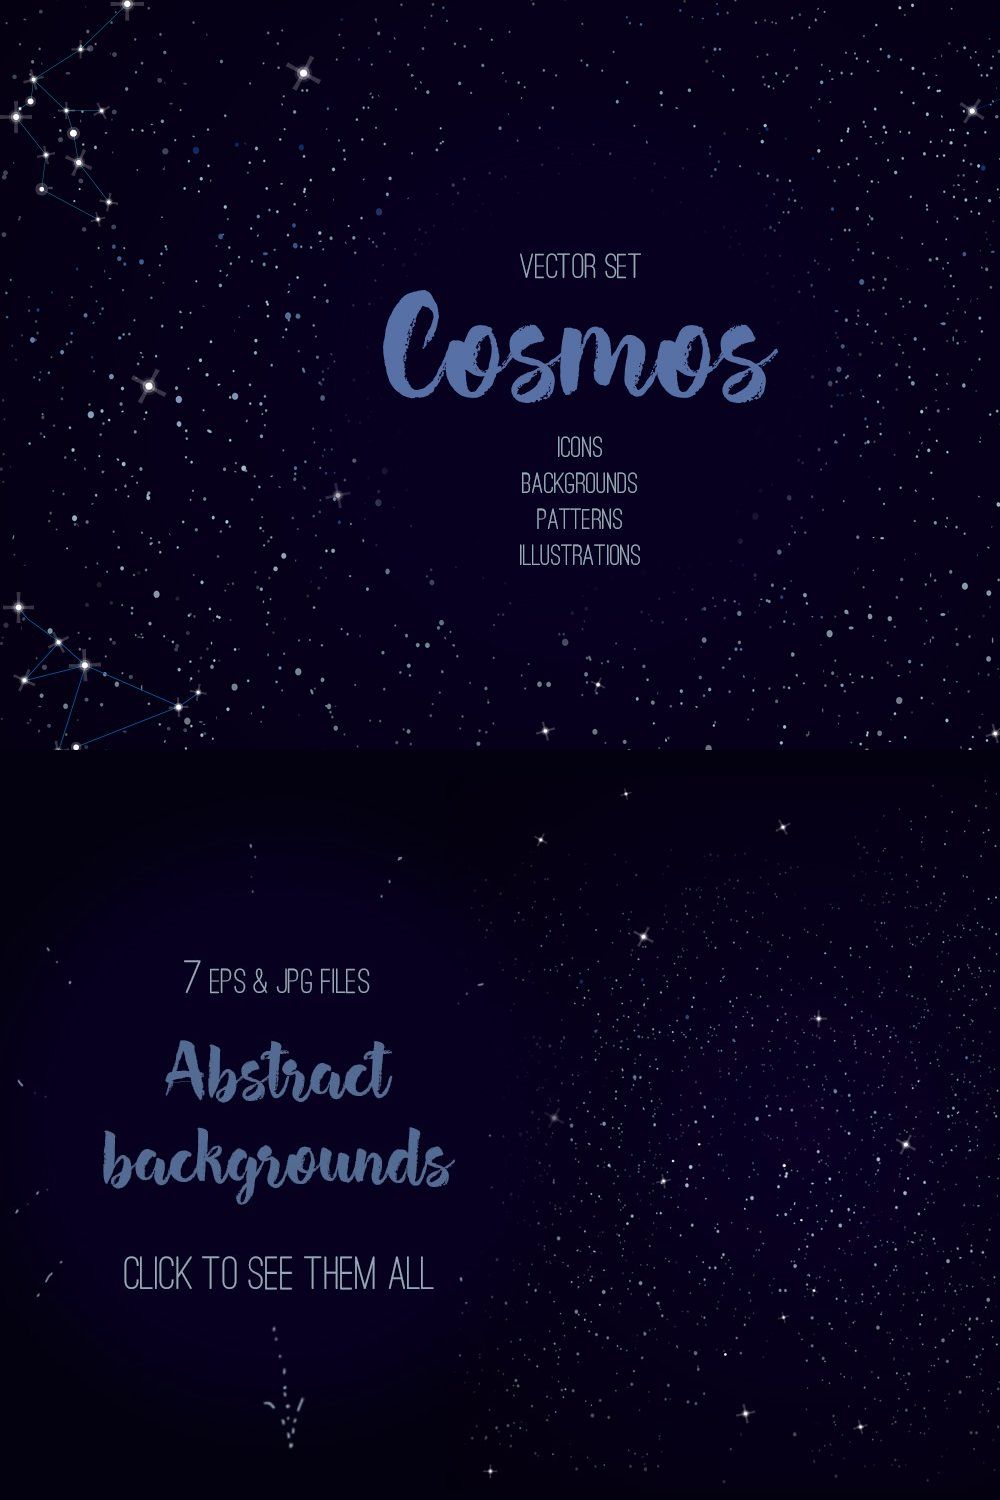 Cosmos vector set pinterest preview image.